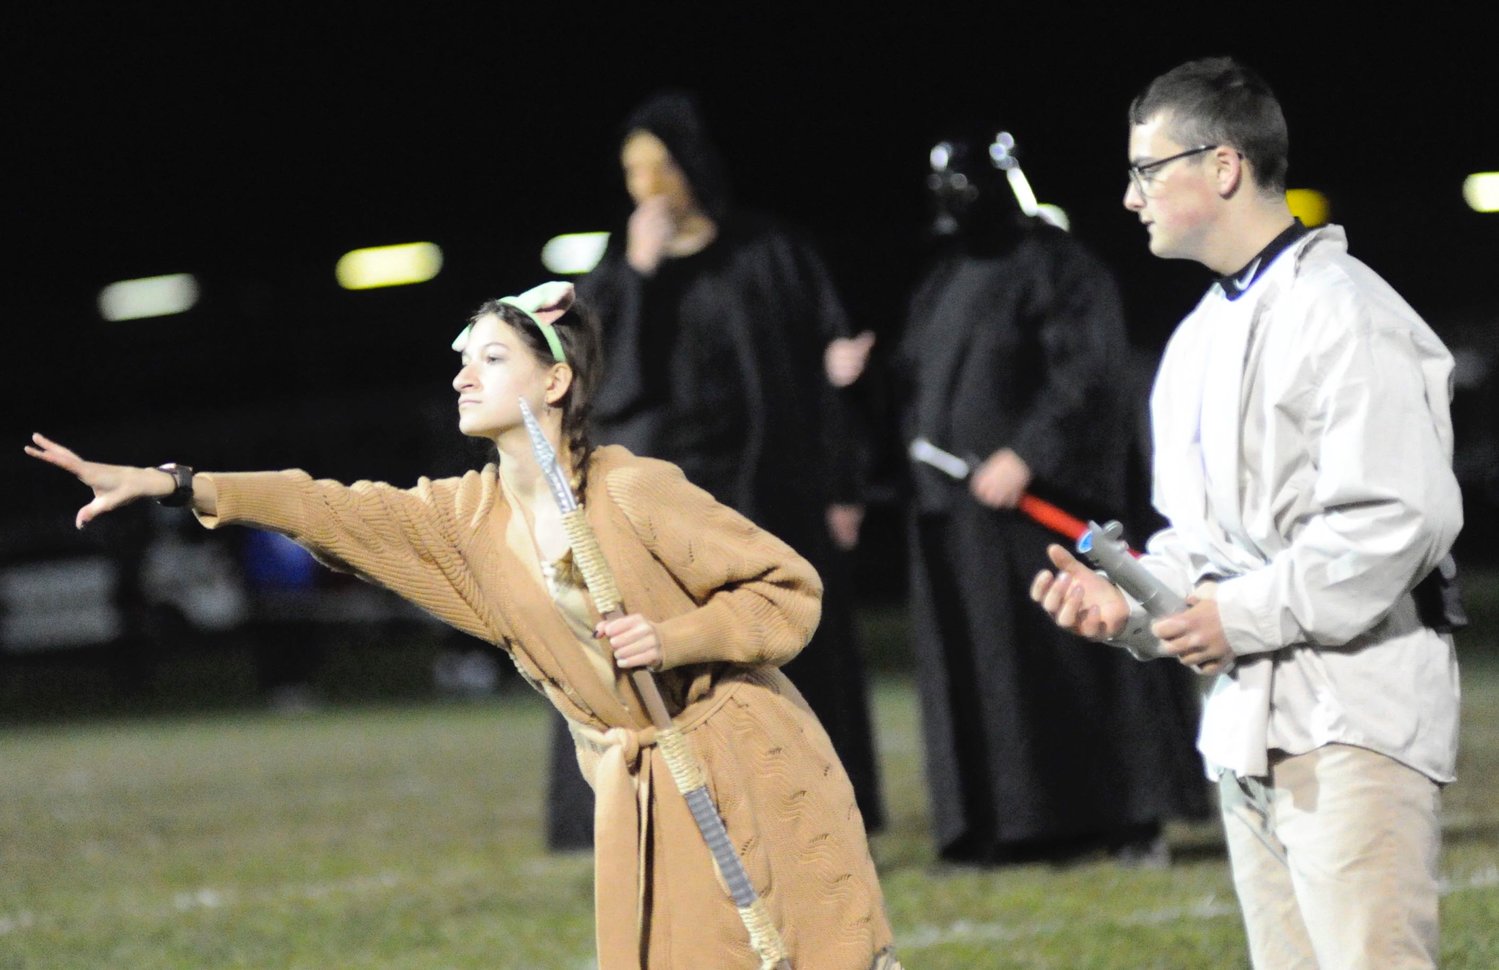 And the force be with you. Shannon Hazen as Jedi Master Yoda, and John Rodriguez in the role of Luke Skywalker. Lurking in the background are Palpatine, played by Jackson Landers, and Andrew Ihlefeldt as the Dark Lord of the Sith.